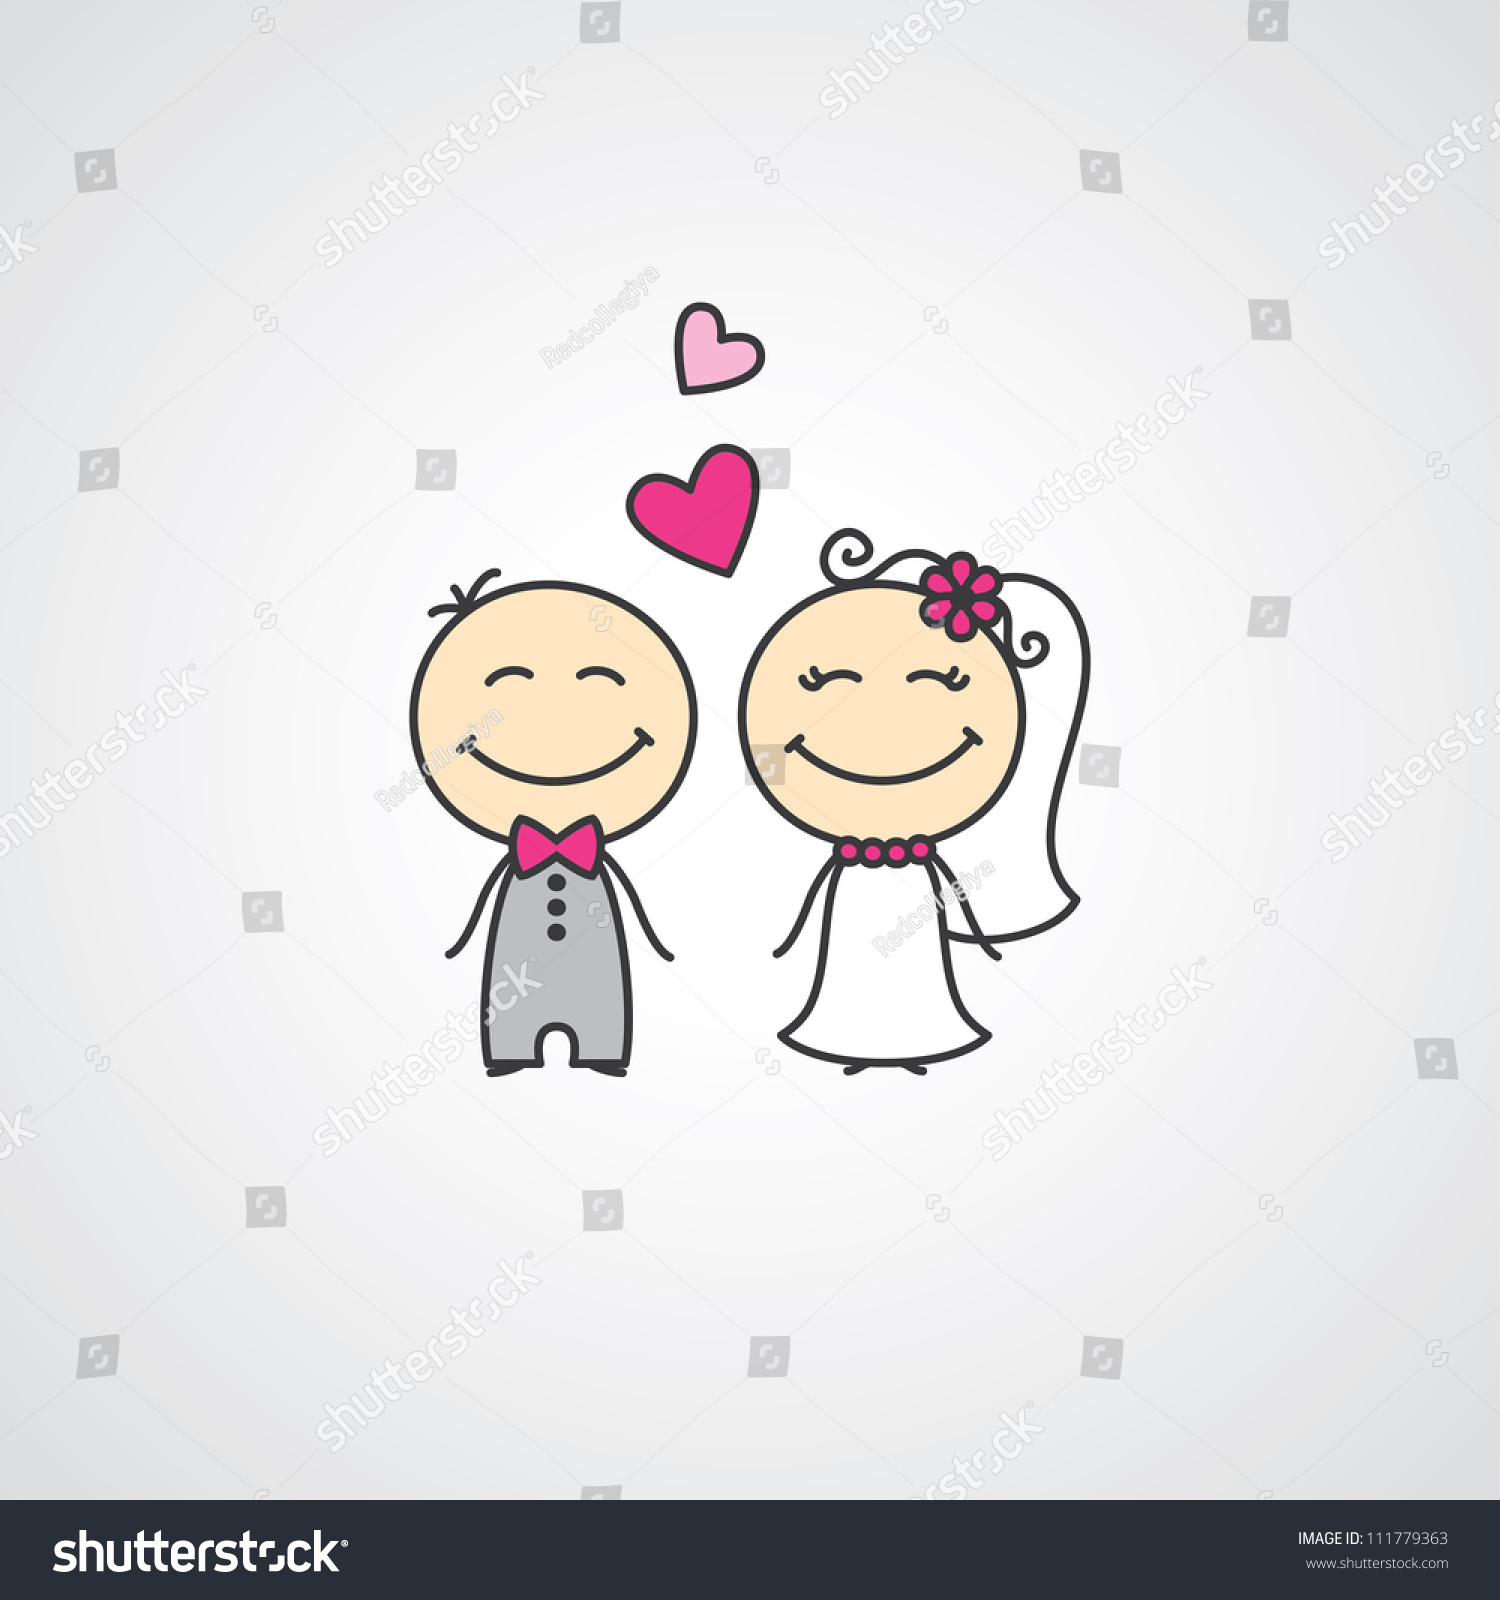 clipart gallery for wedding card - photo #48